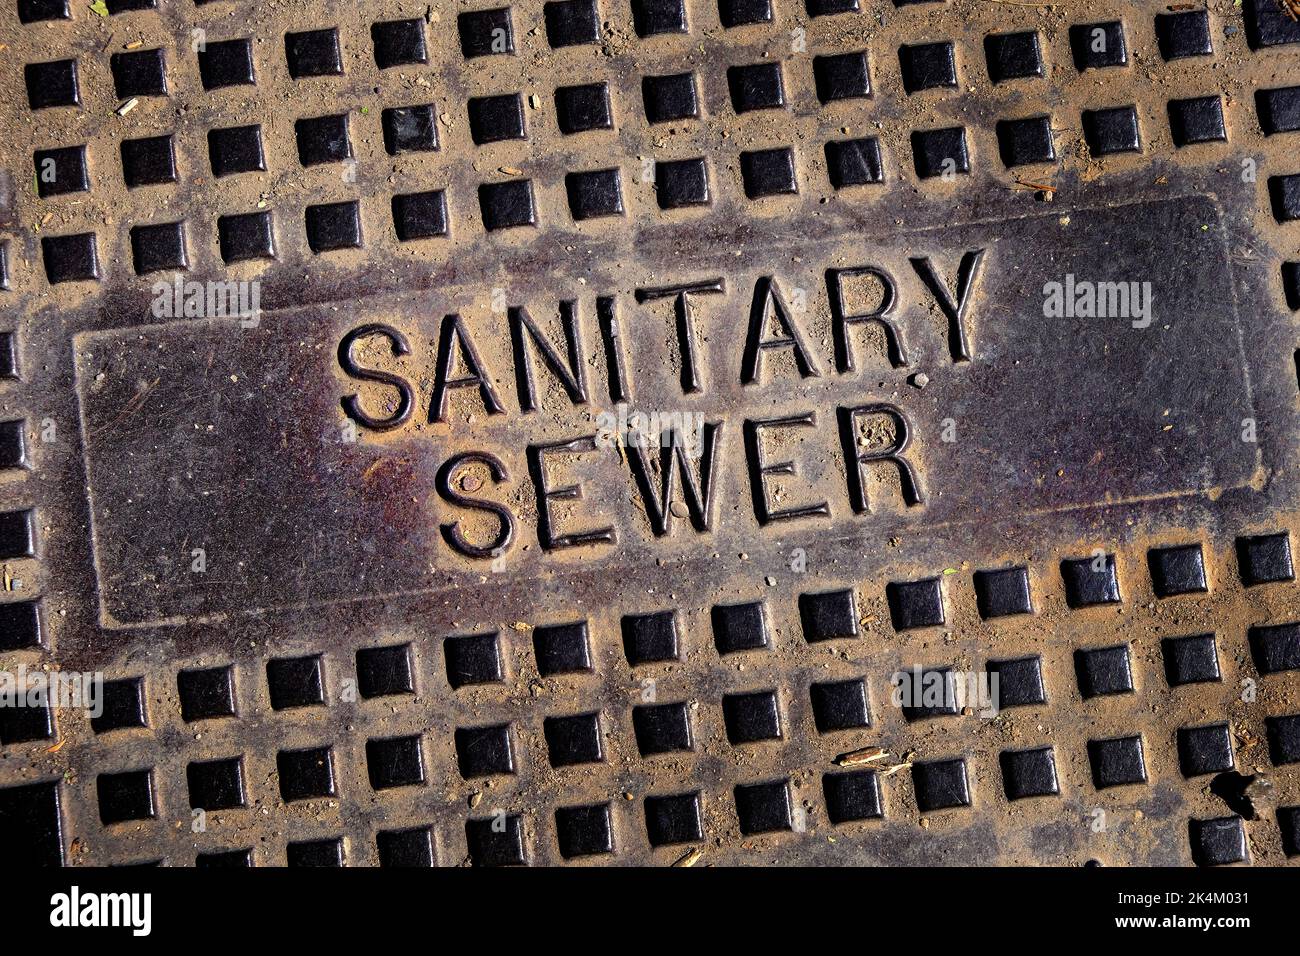 Sanitary sewer man hole cover iron lid with texture and grunge Stock Photo